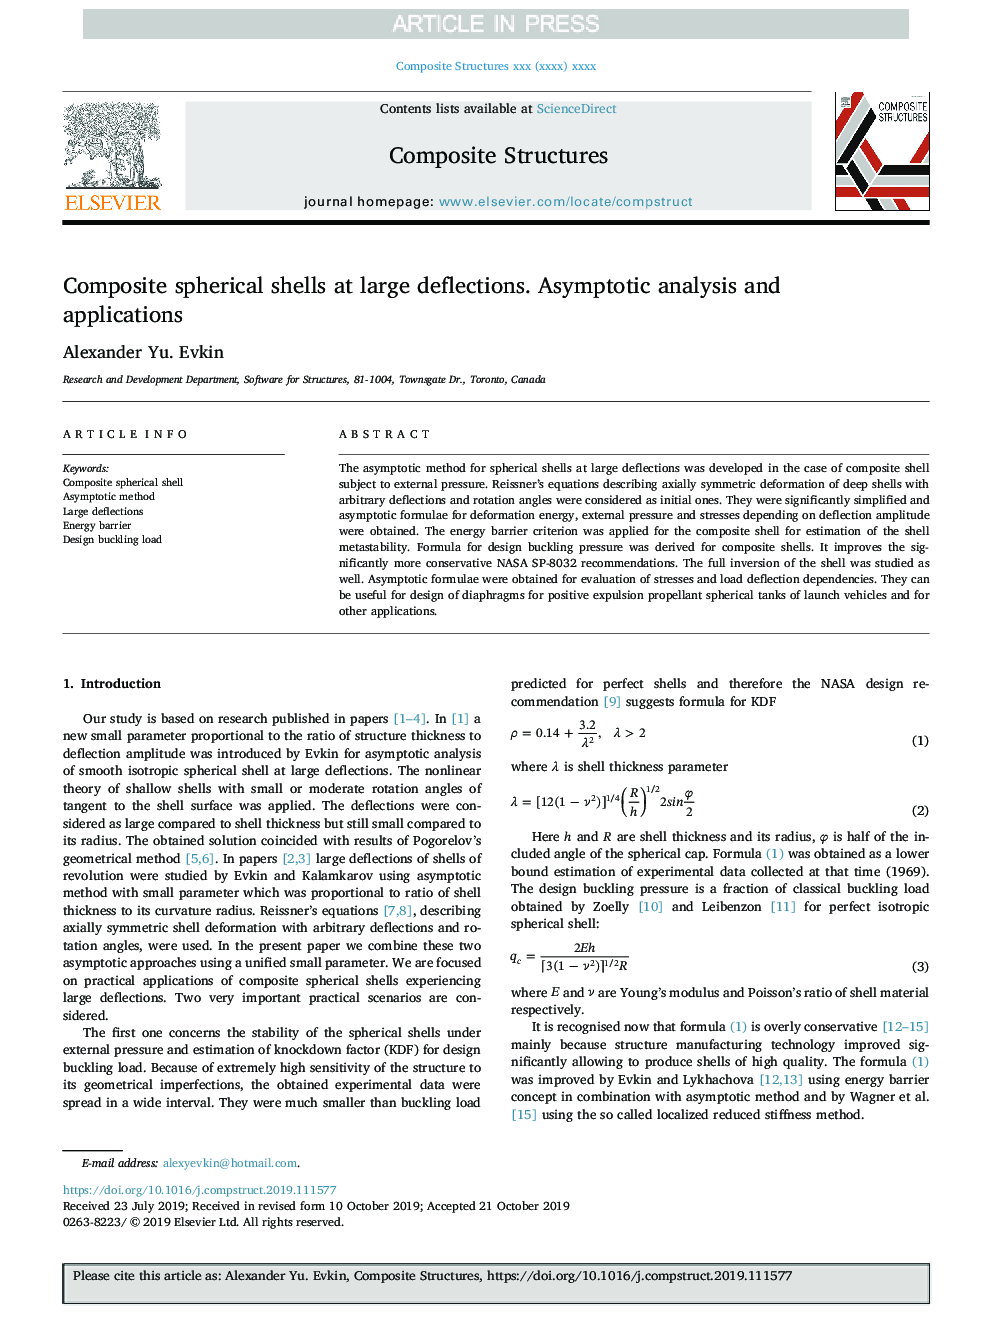 Composite spherical shells at large deflections. Asymptotic analysis and applications